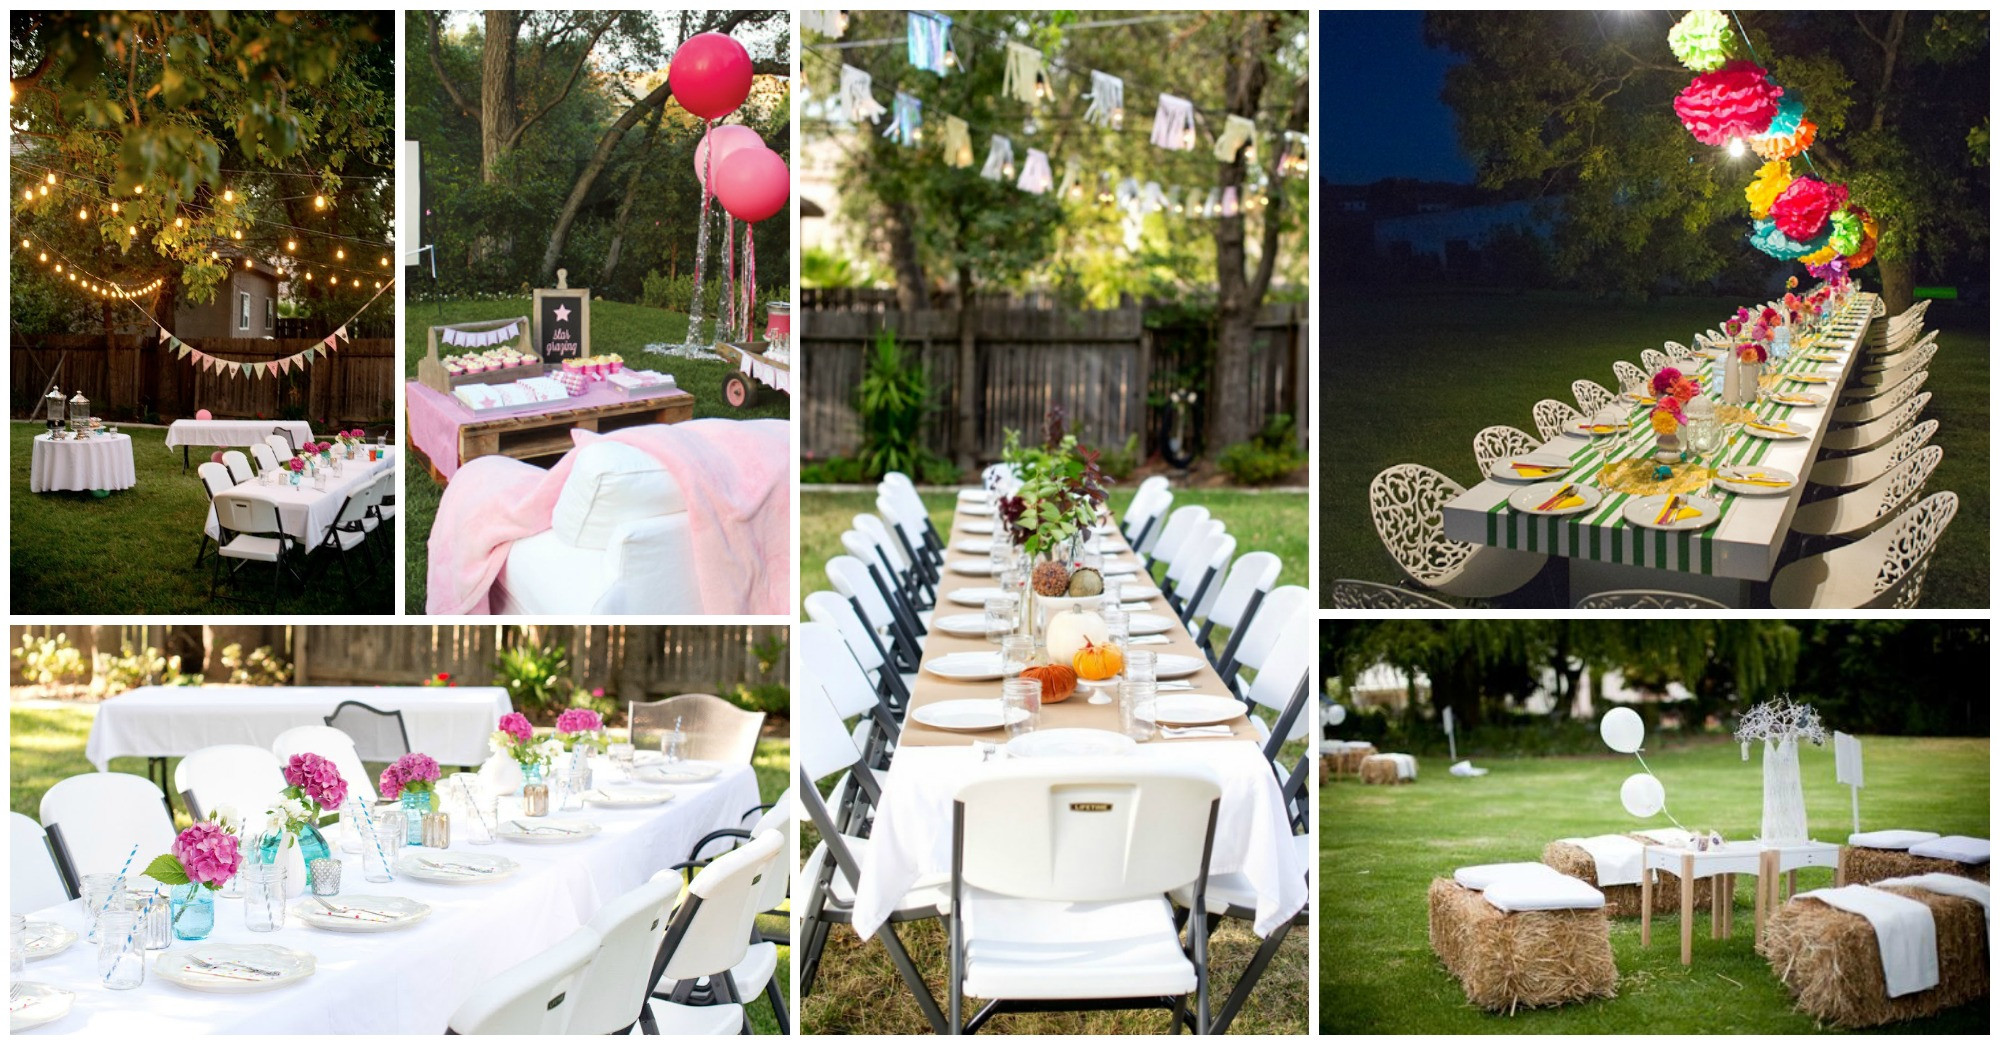 Backyard Party Ideas Pinterest
 Backyard Party Decorations For Unfor table Moments